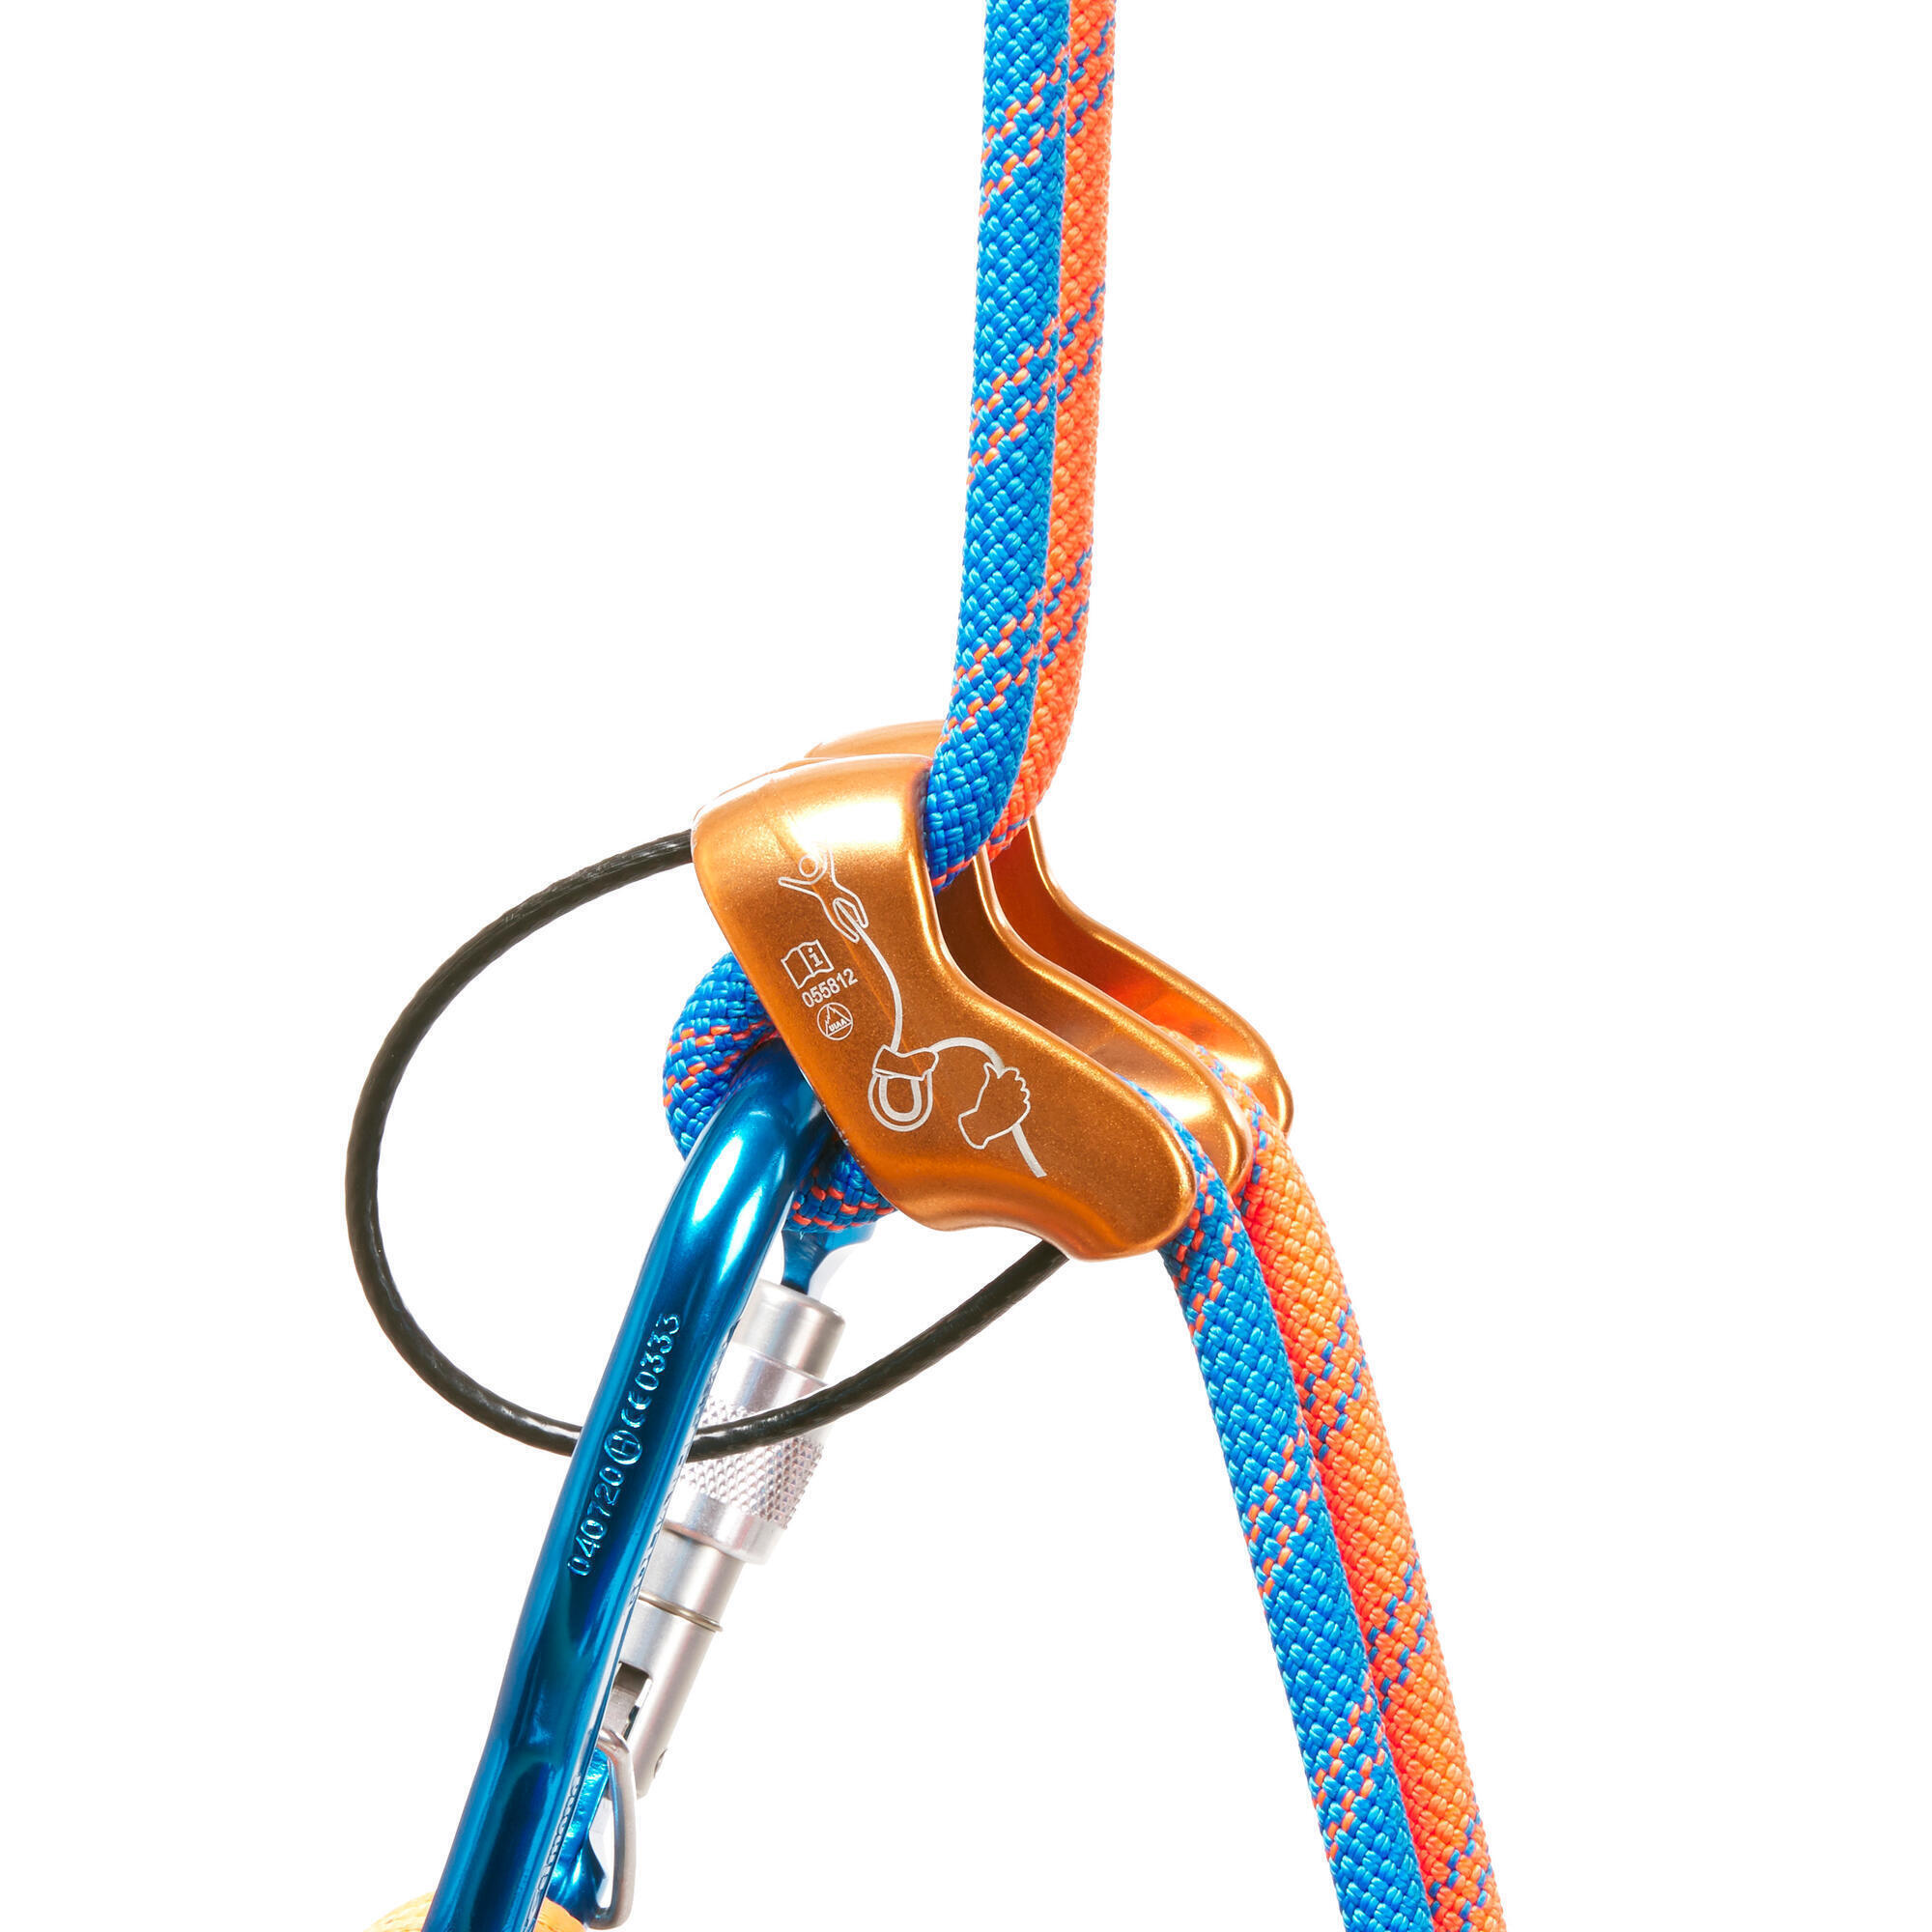 HMS MOUNTAINEERING AND CLIMBING SCREWGATE CARABINER GOLIATH SECURE - BLUE 5/6